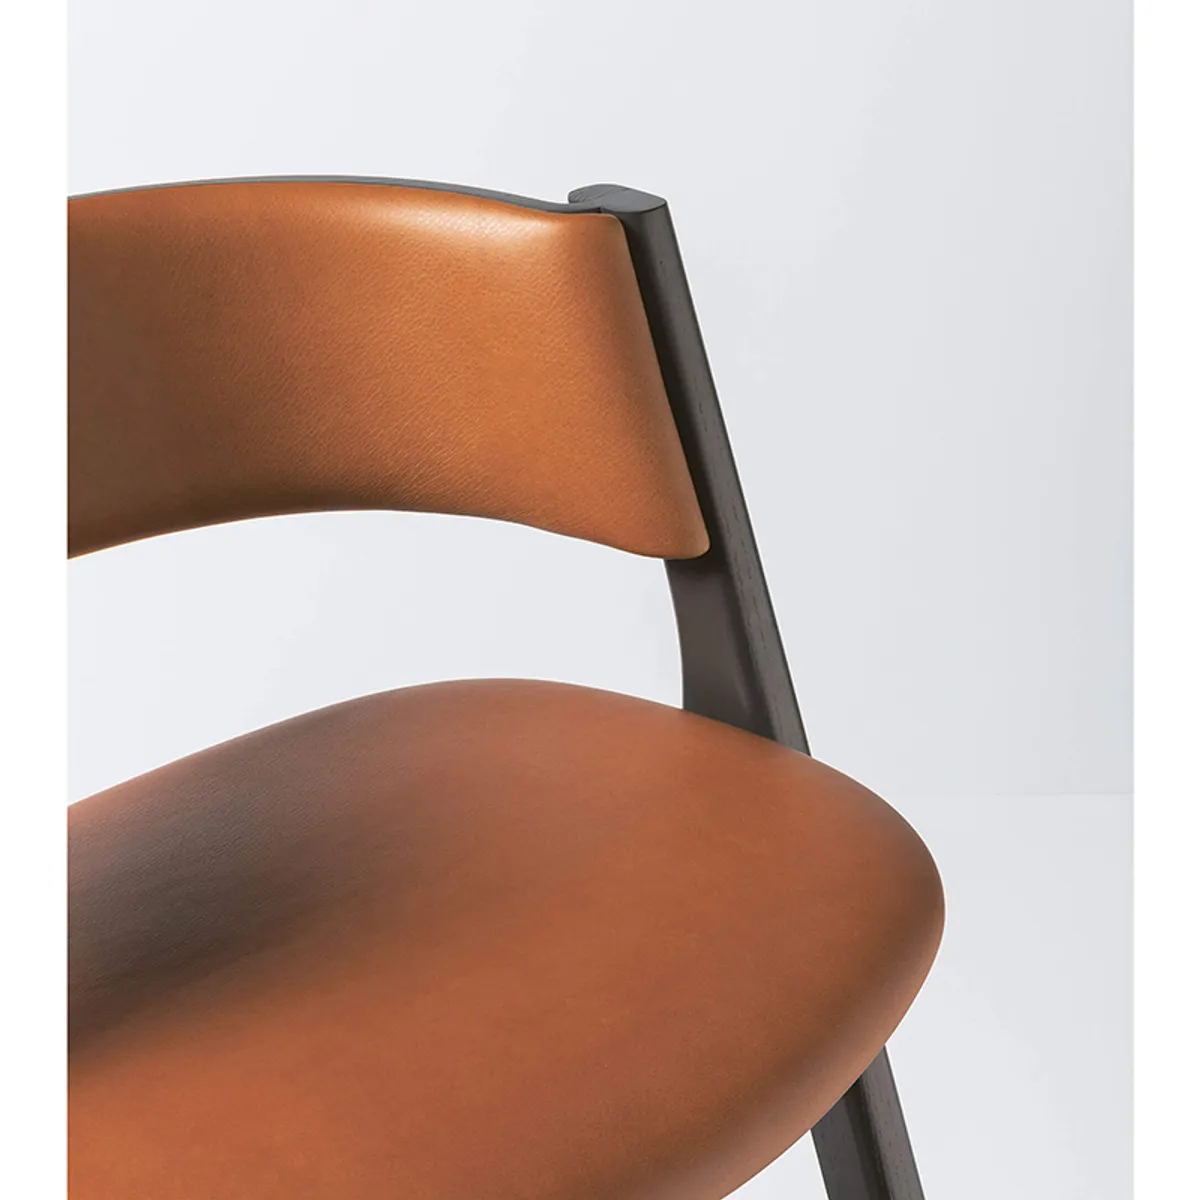 Folly Soft Bar Stool 3 24 0 Inside Out Contracts